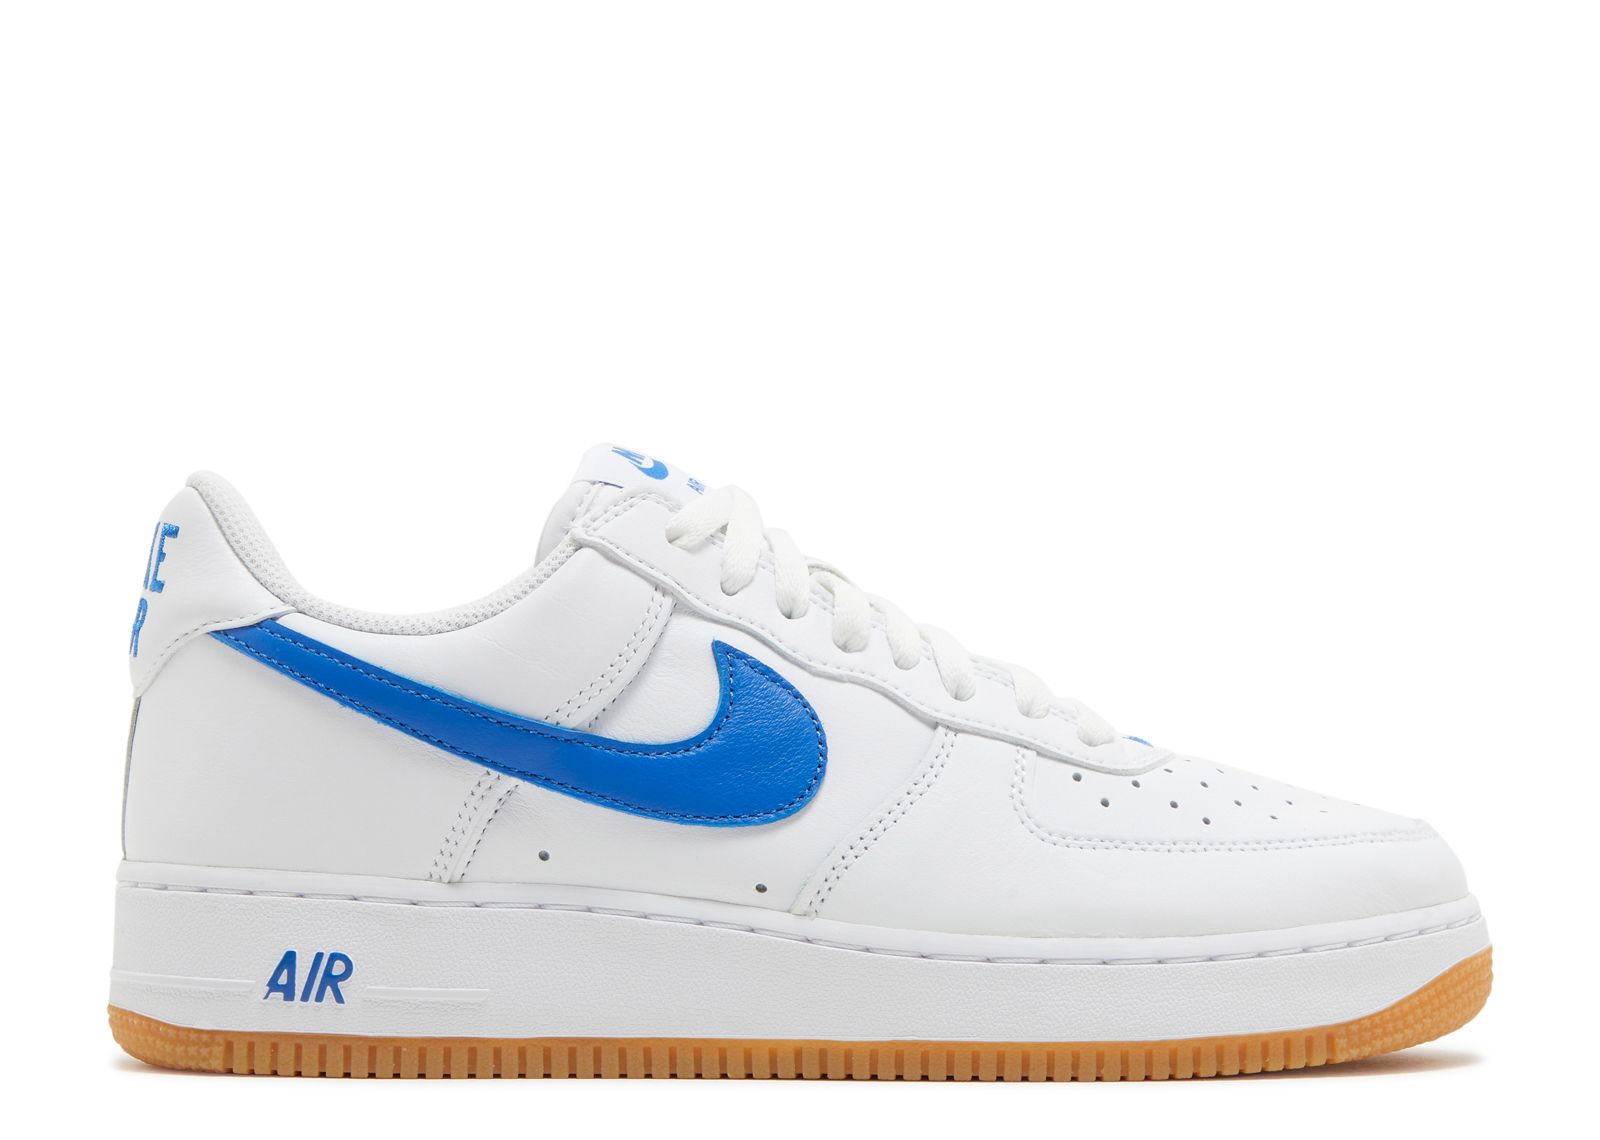 Кроссовки Nike Air Force 1 Low 'Color Of The Month - White Royal Blue', белый original authentic nike air force 1 low mini swoosh men s skateboarding shoes sport outdoor sneakers 2018 new arrival 823511 603